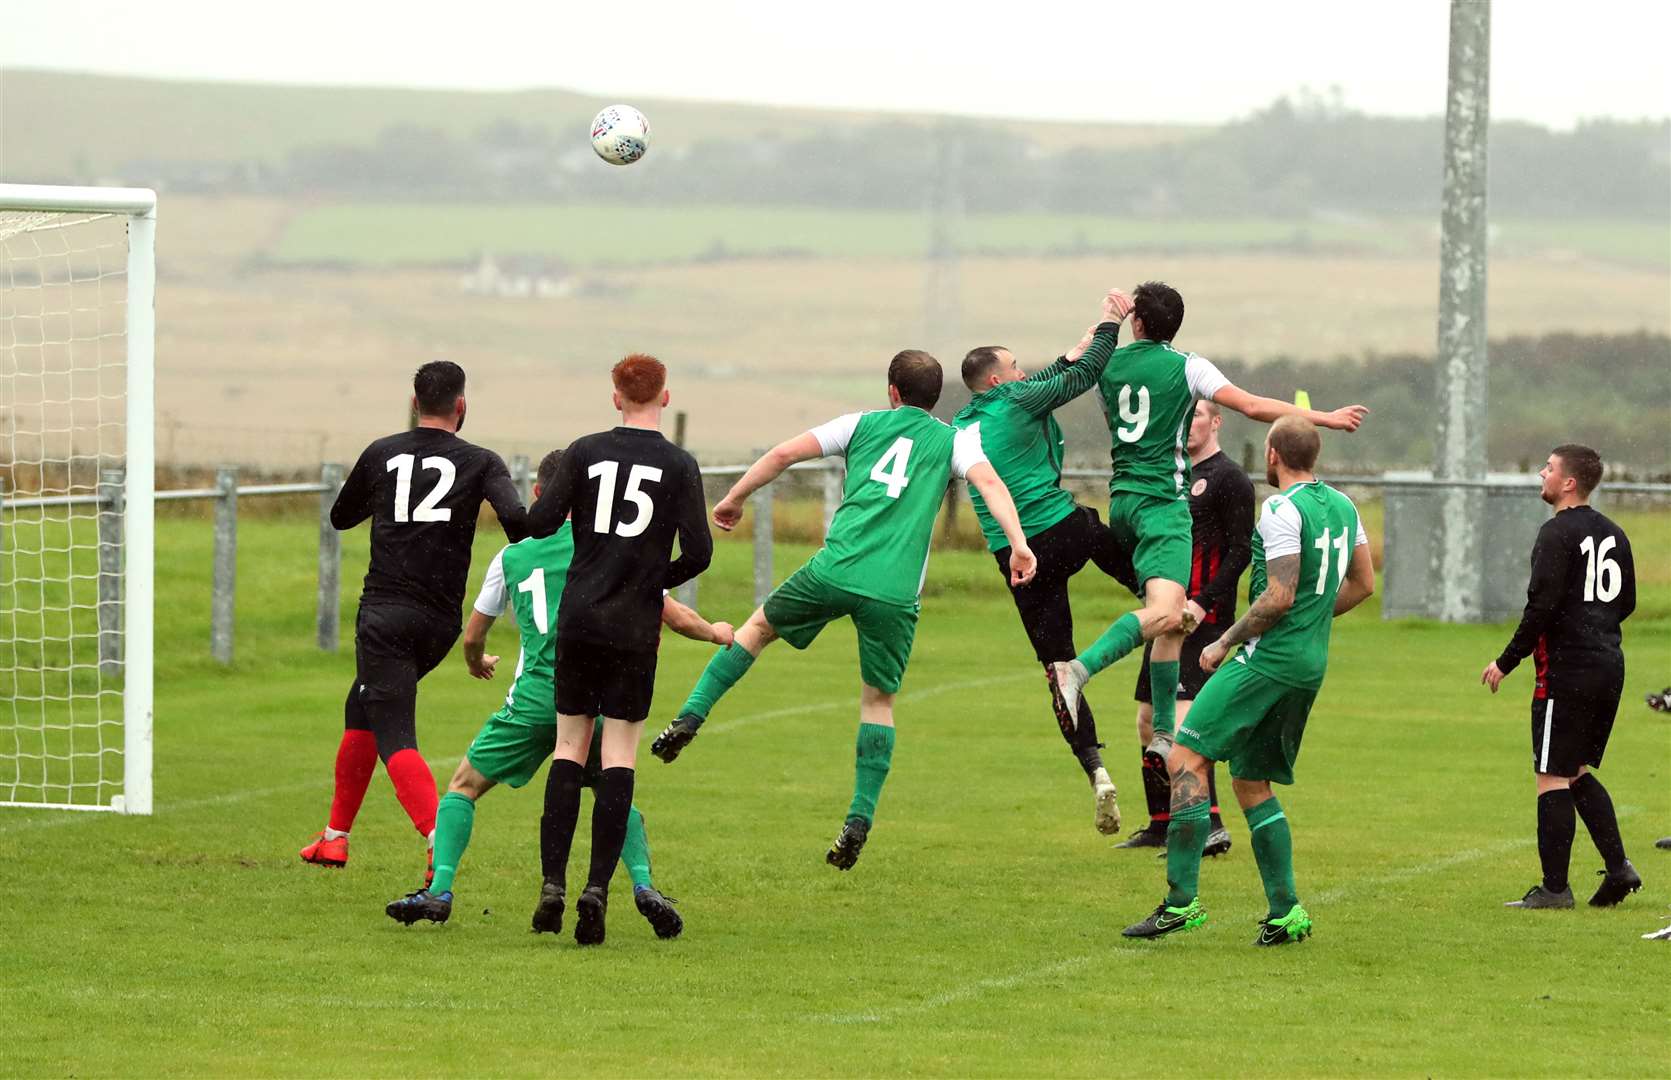 A let-off for Halkirk United keeper Sean Milligan as Bonar come close with a header from a free kick. Picture: James Gunn